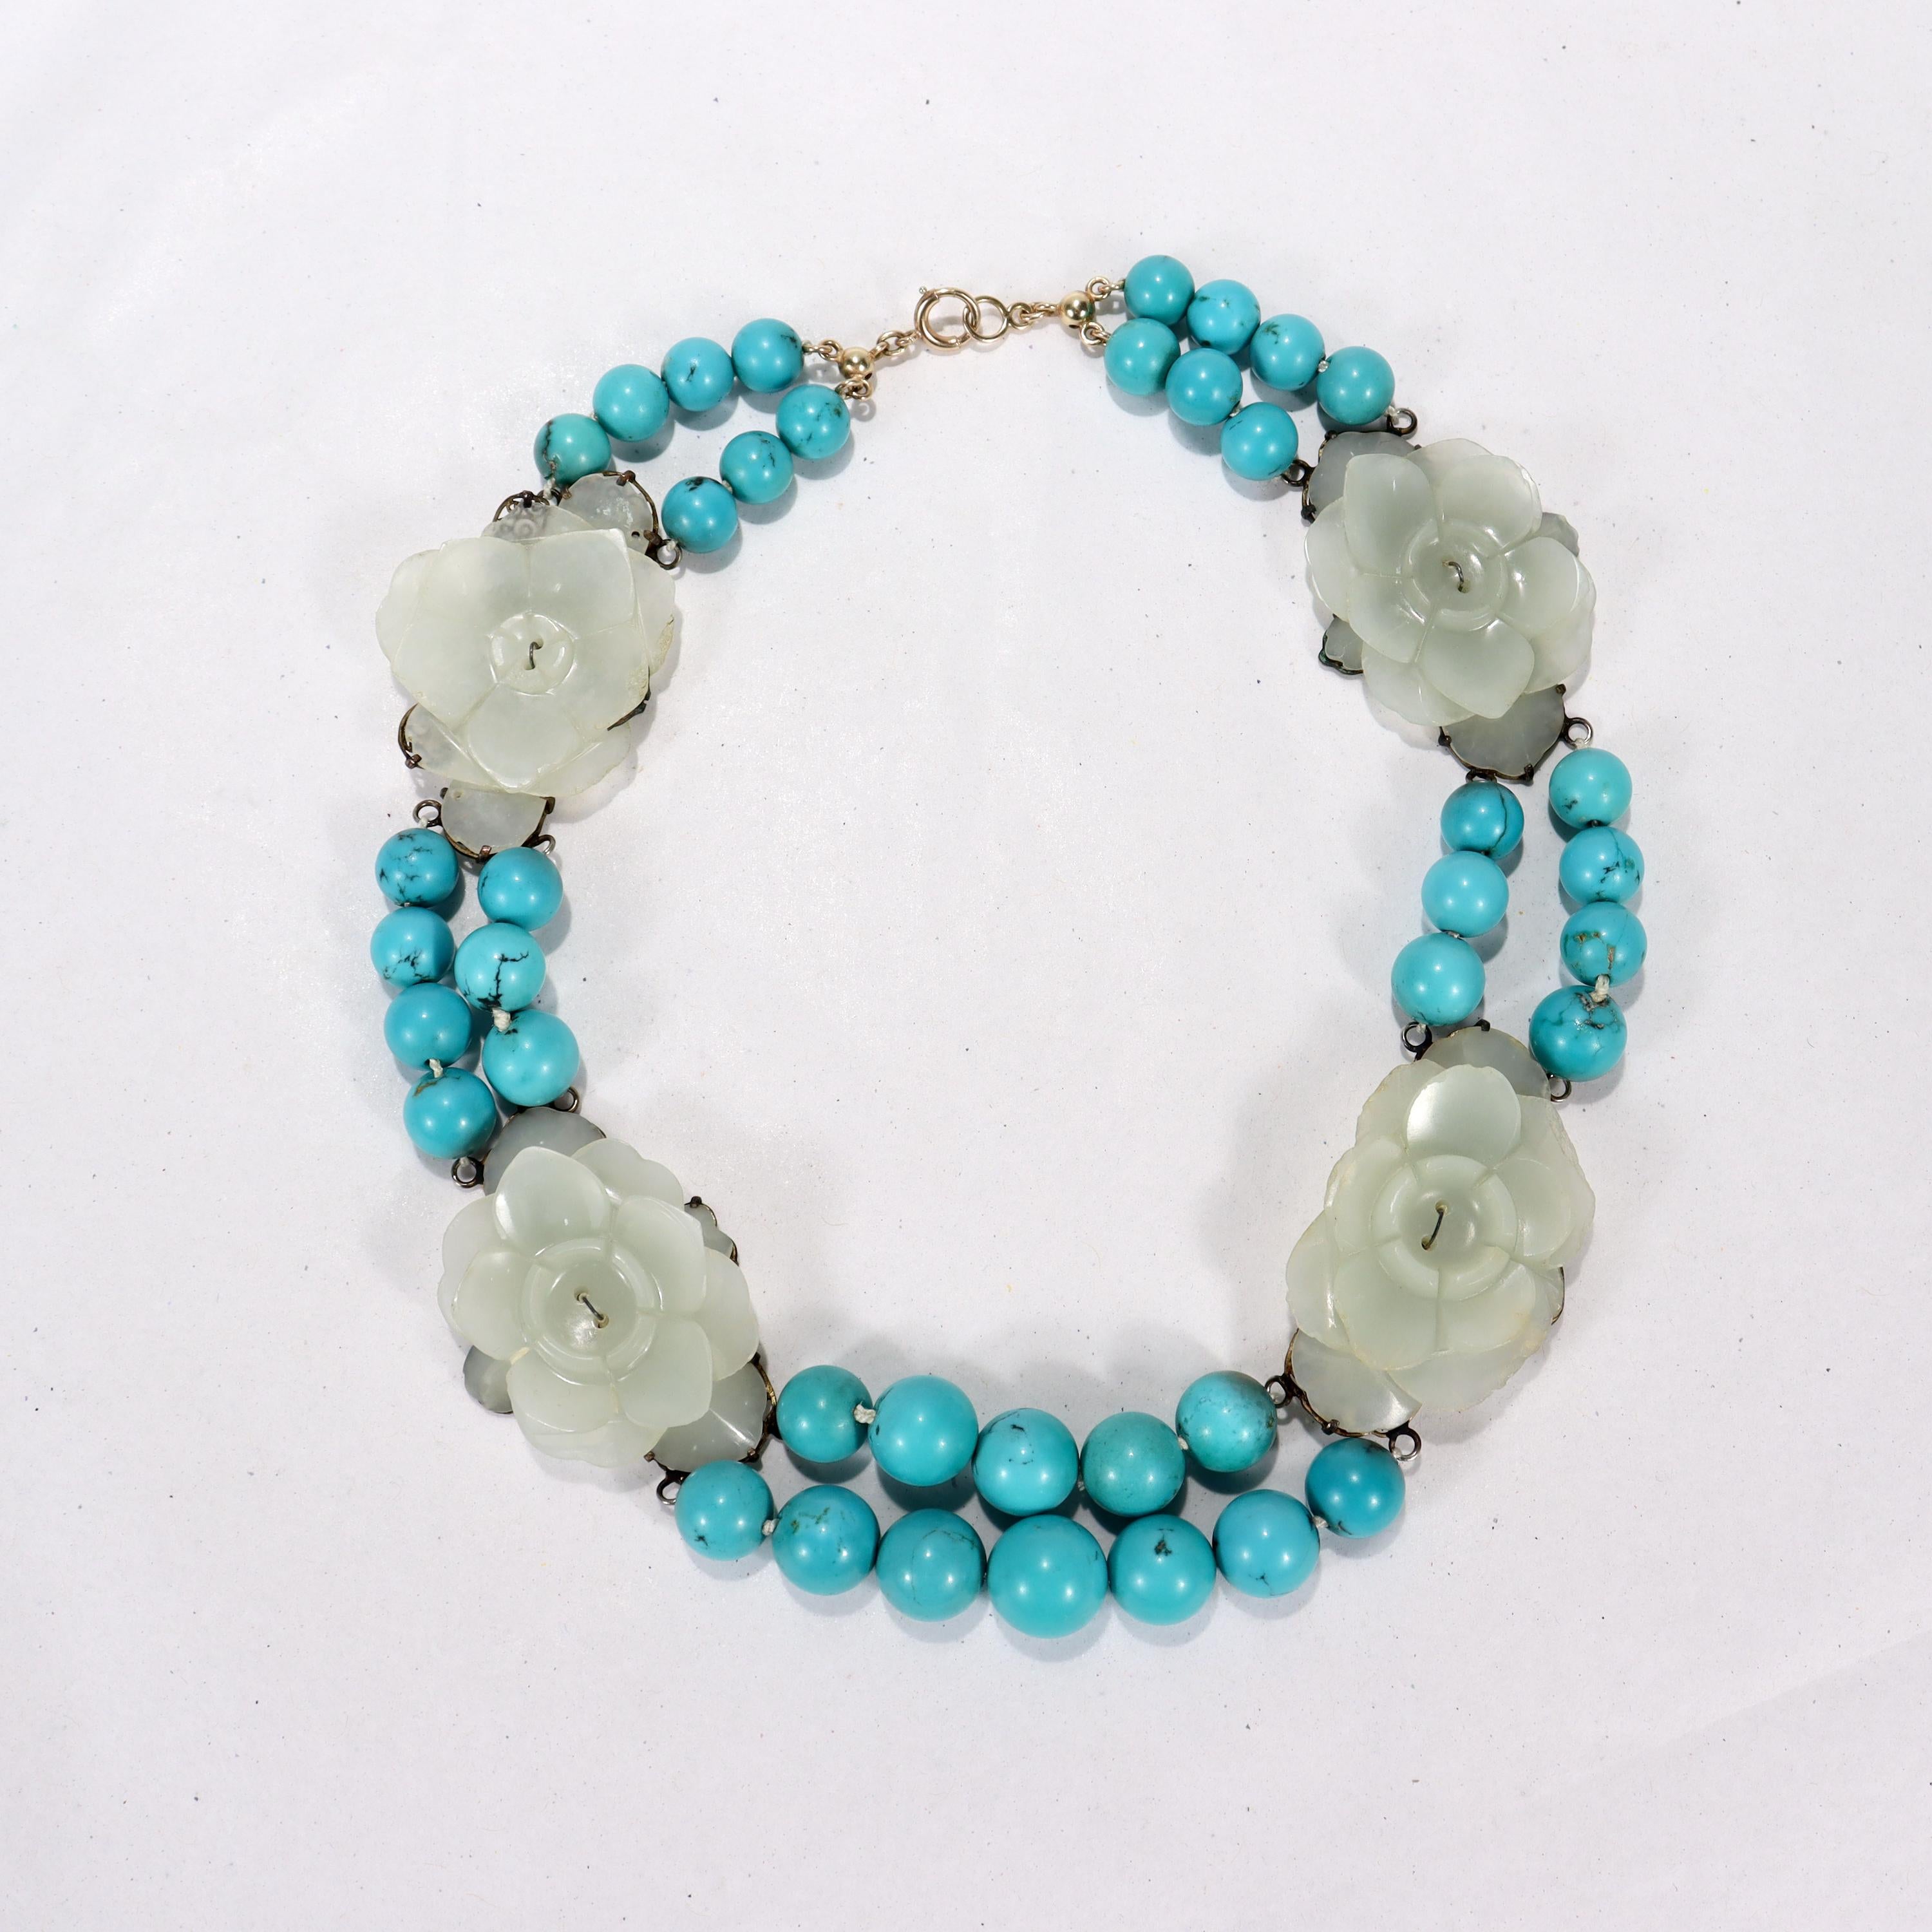 A very fine Jade and turquoise necklace.

Comprised of large, older (or possibly antique and very likely Chinese) carved jade flowers prong set on silver filigree backs strung between double strand segments of turquoise beads. We think this is a